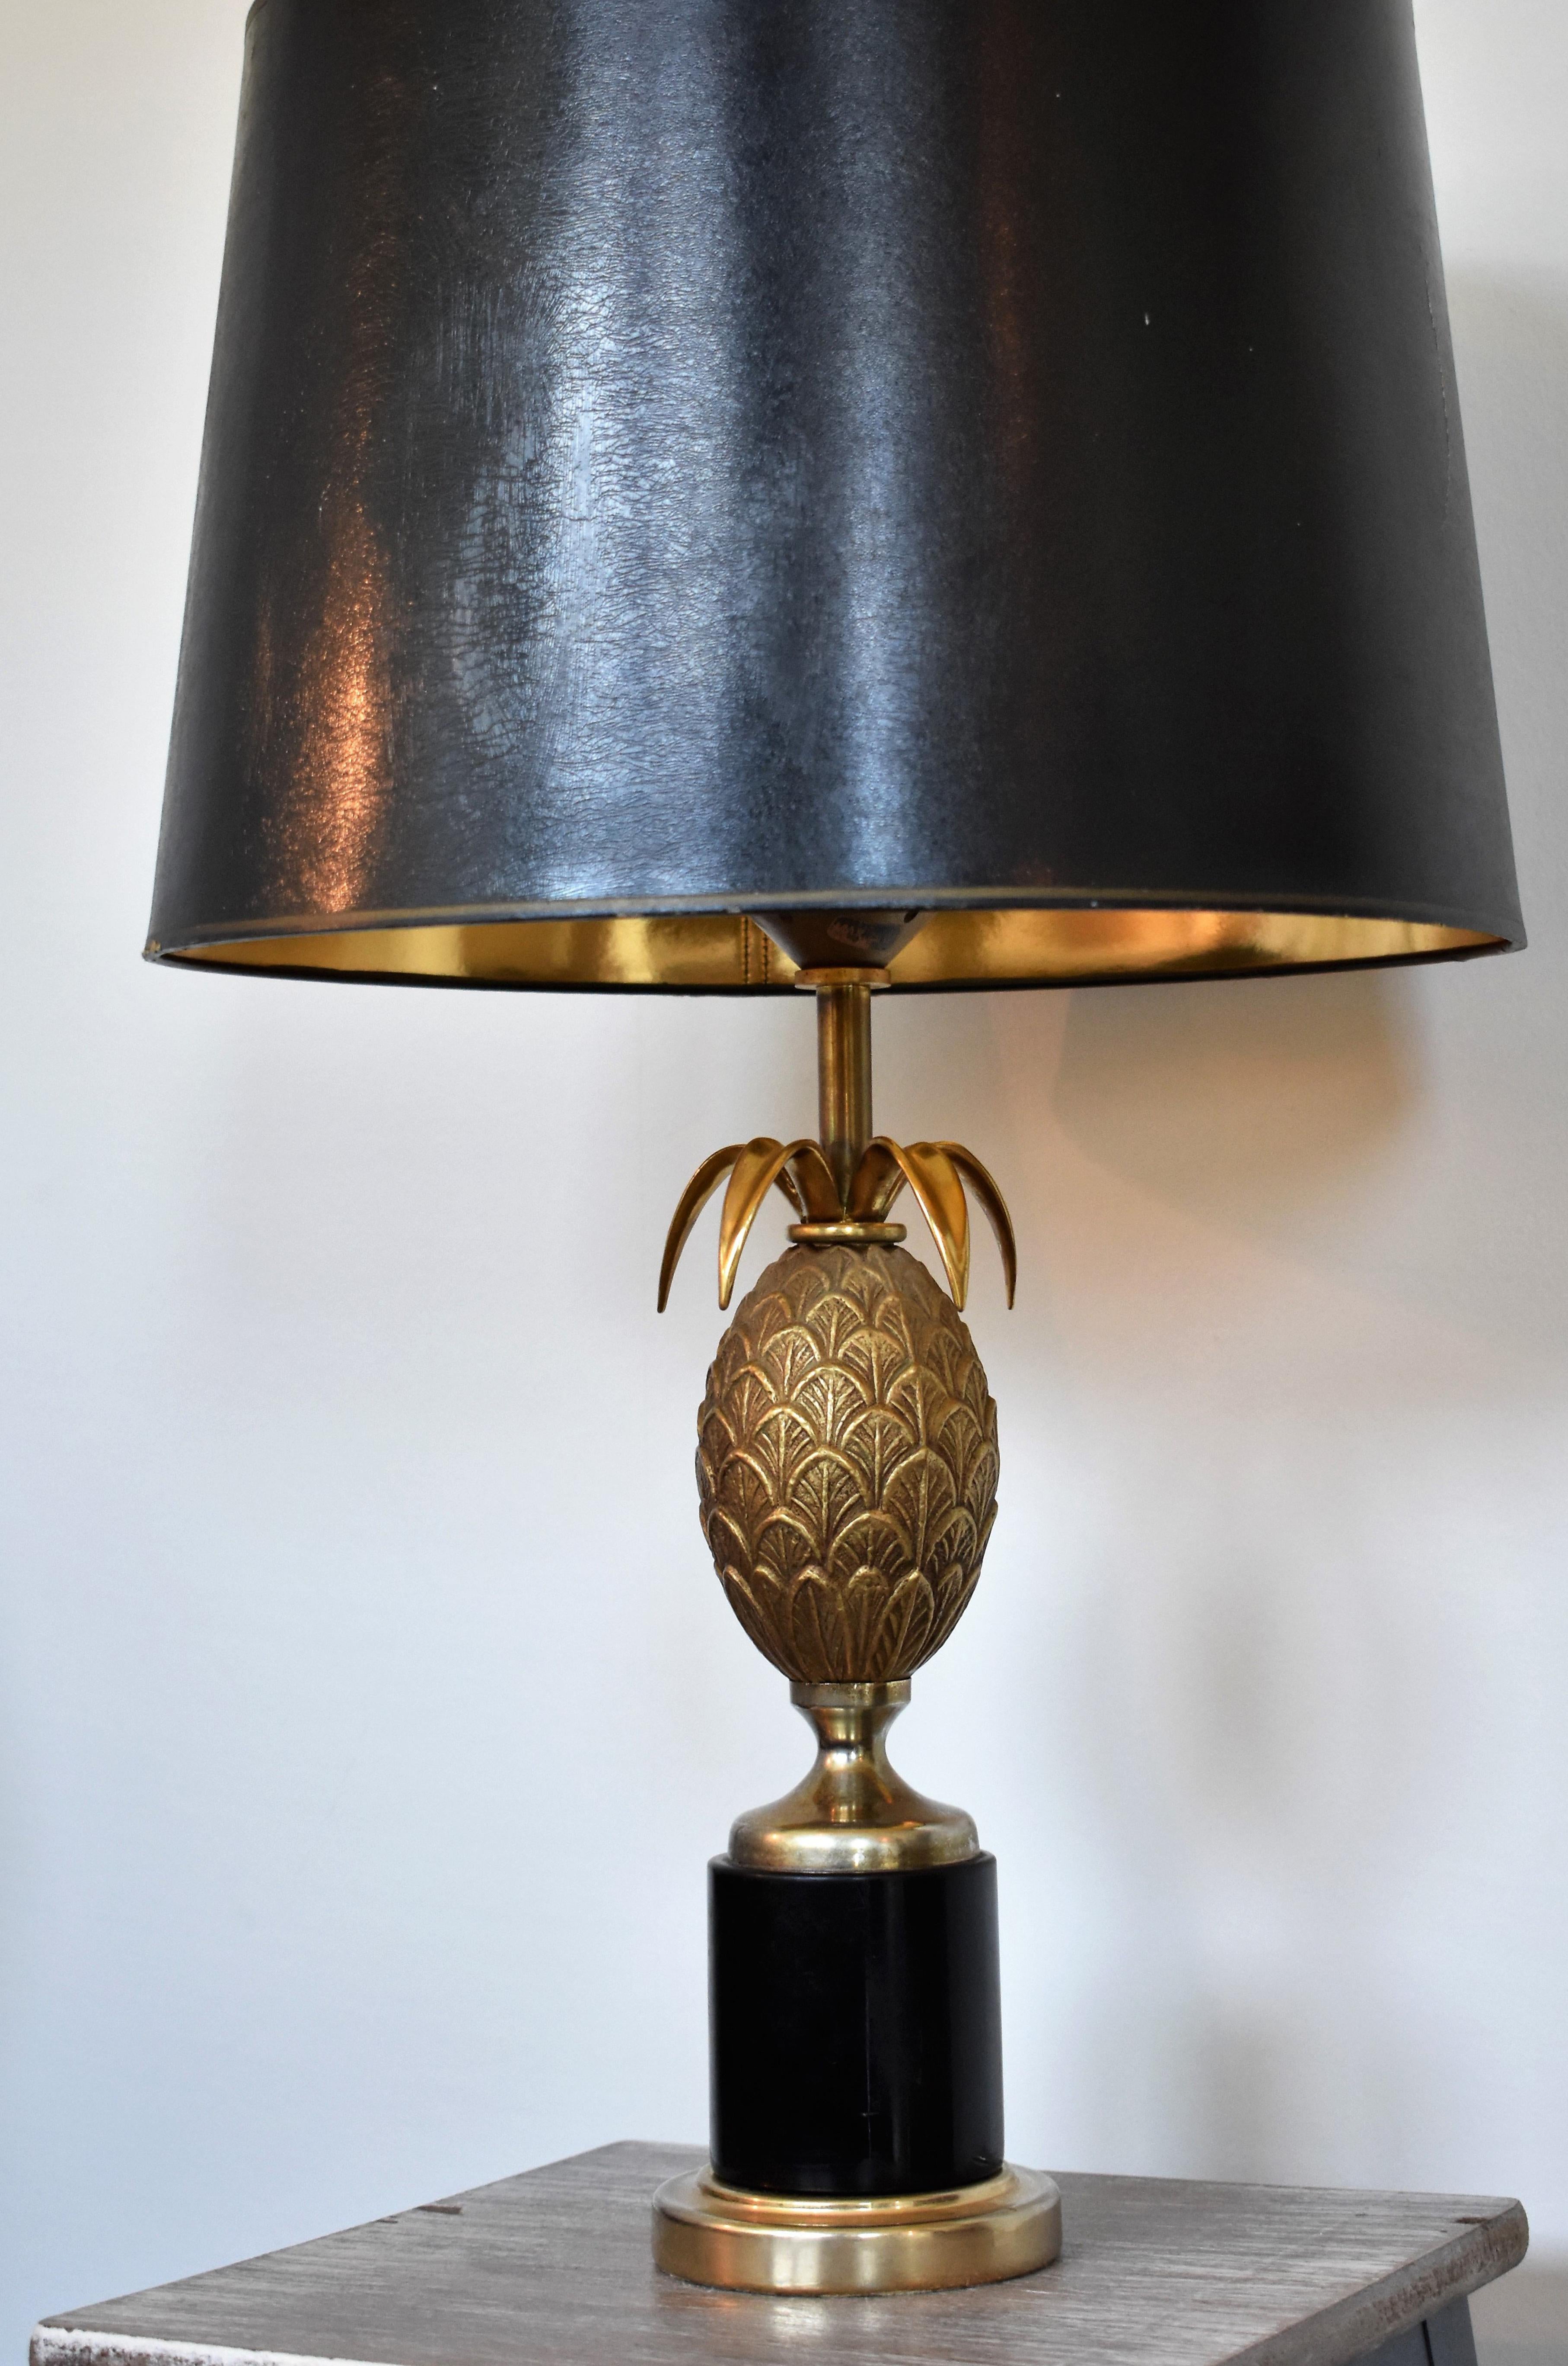 Information:
This original brass pineapple lamp is in the style of Maison Charles and was designed in circa 1970. Of the different Maison Charles lamps, the pineapple lamps are most famous and most admired. 

The shade is a showmodel and will not be